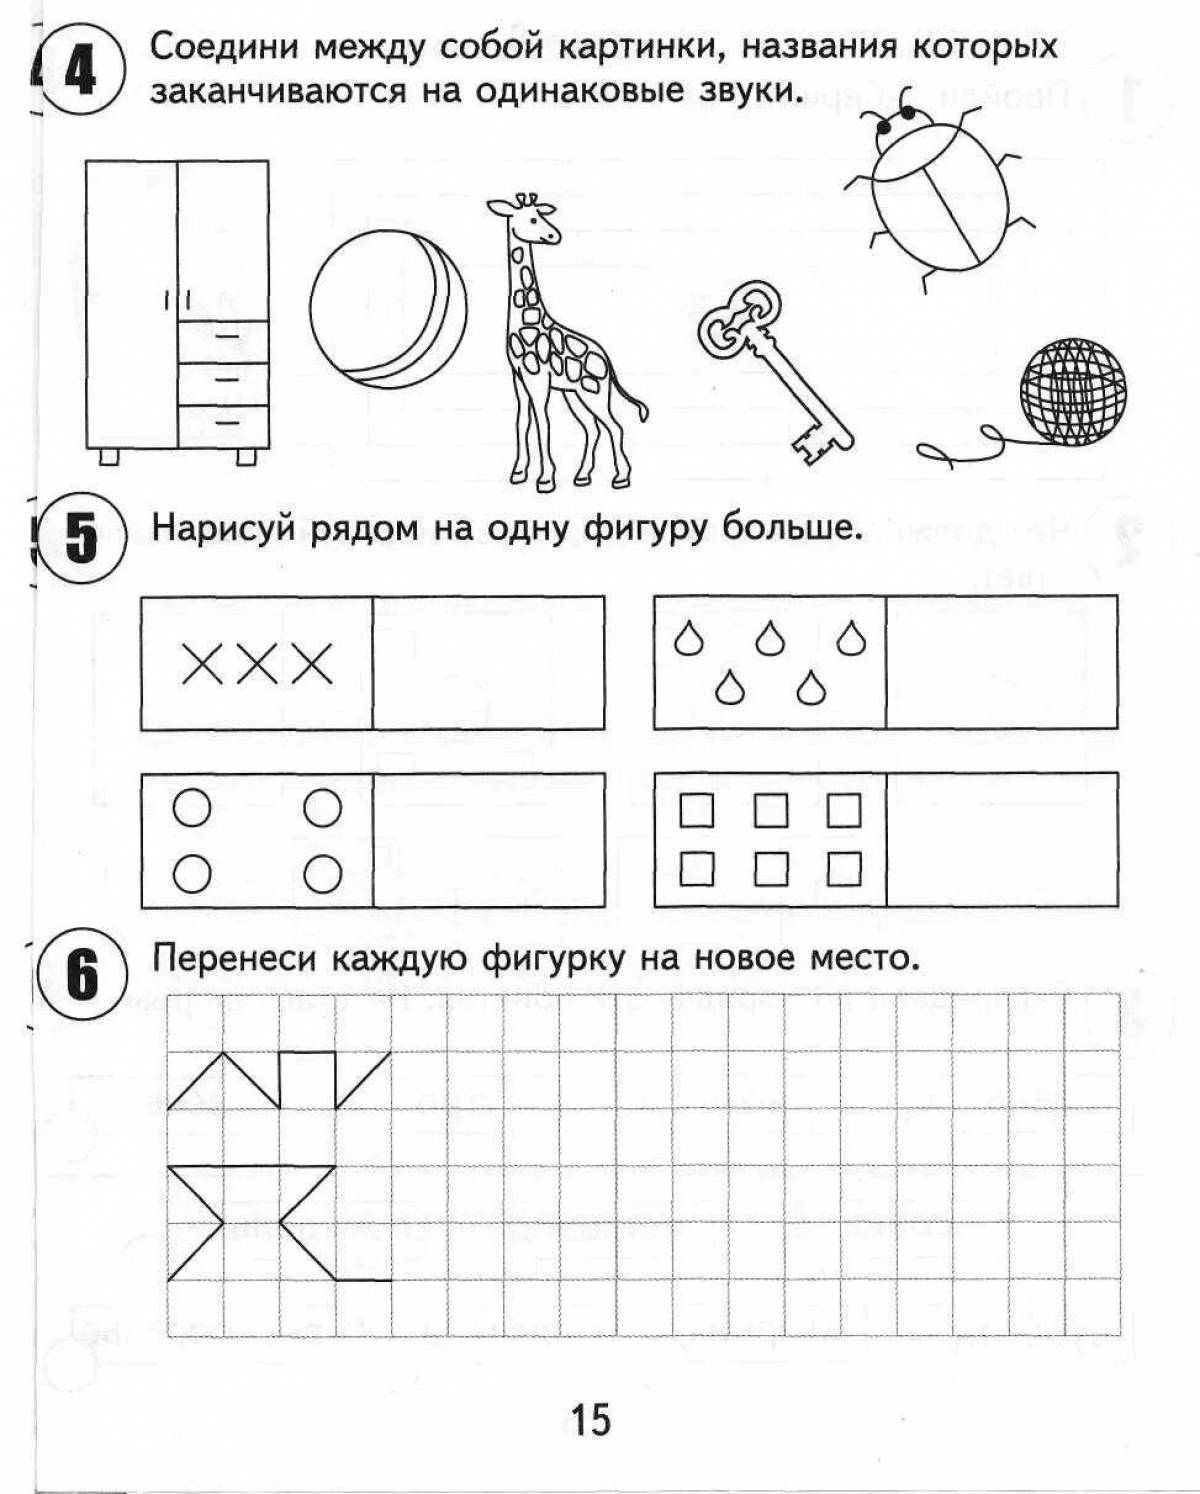 Educational coloring pages for school preparation